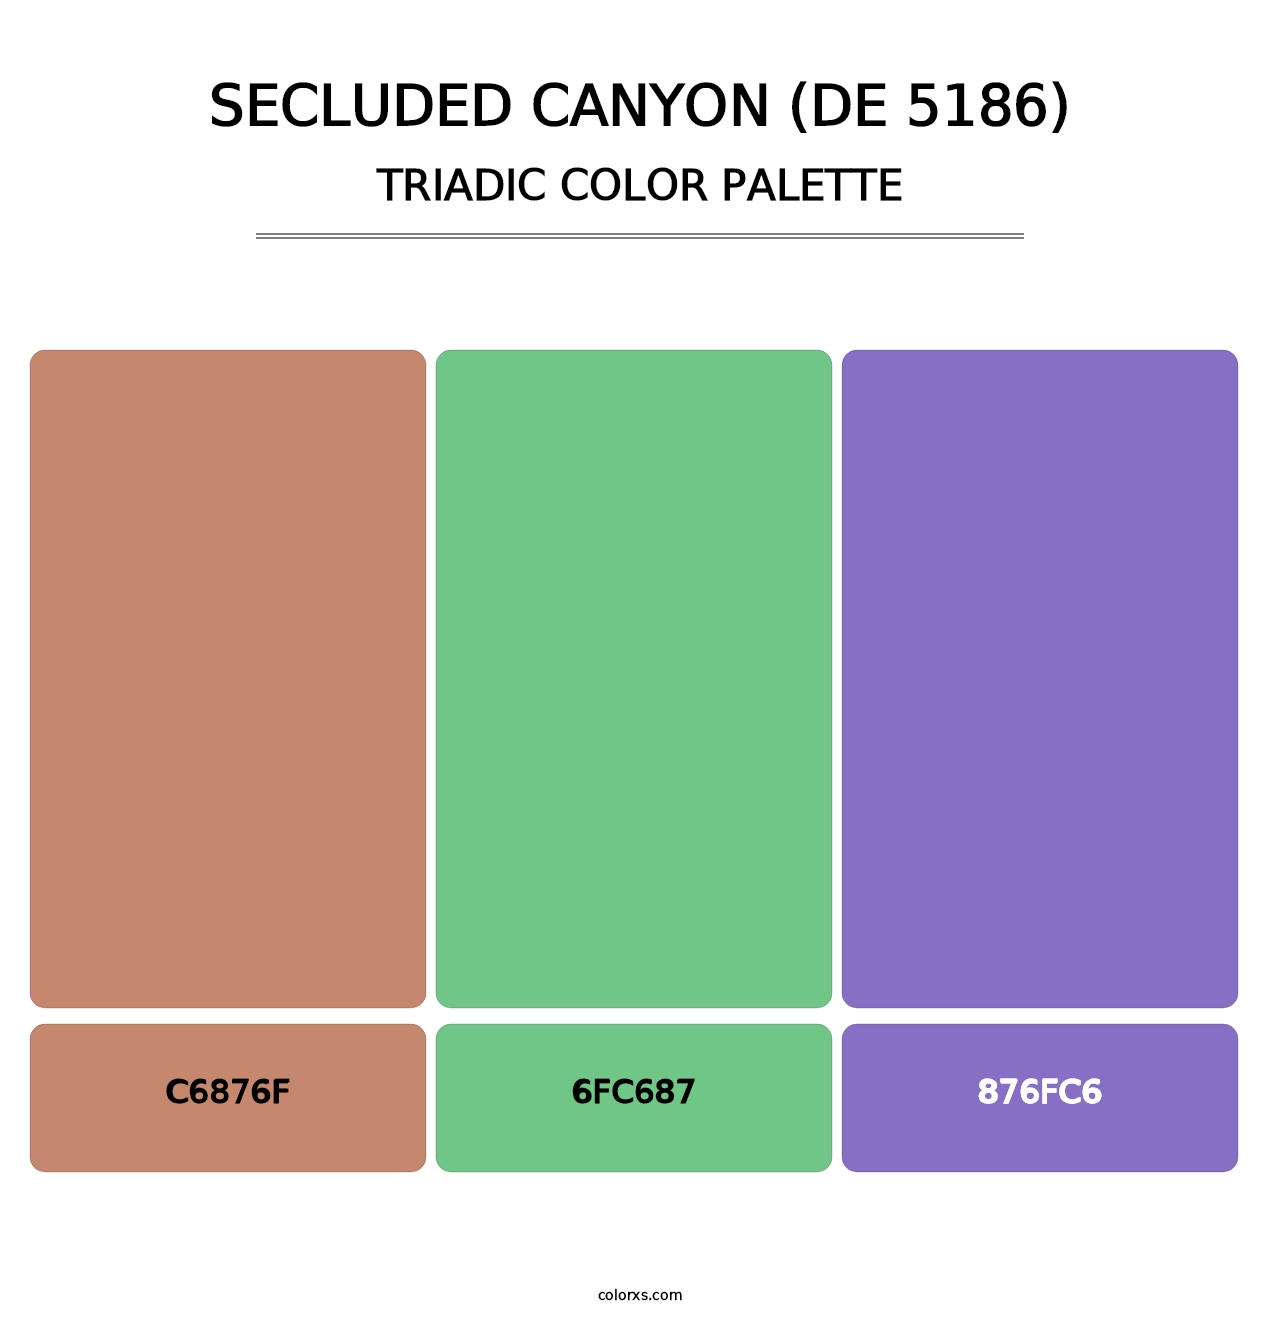 Secluded Canyon (DE 5186) - Triadic Color Palette